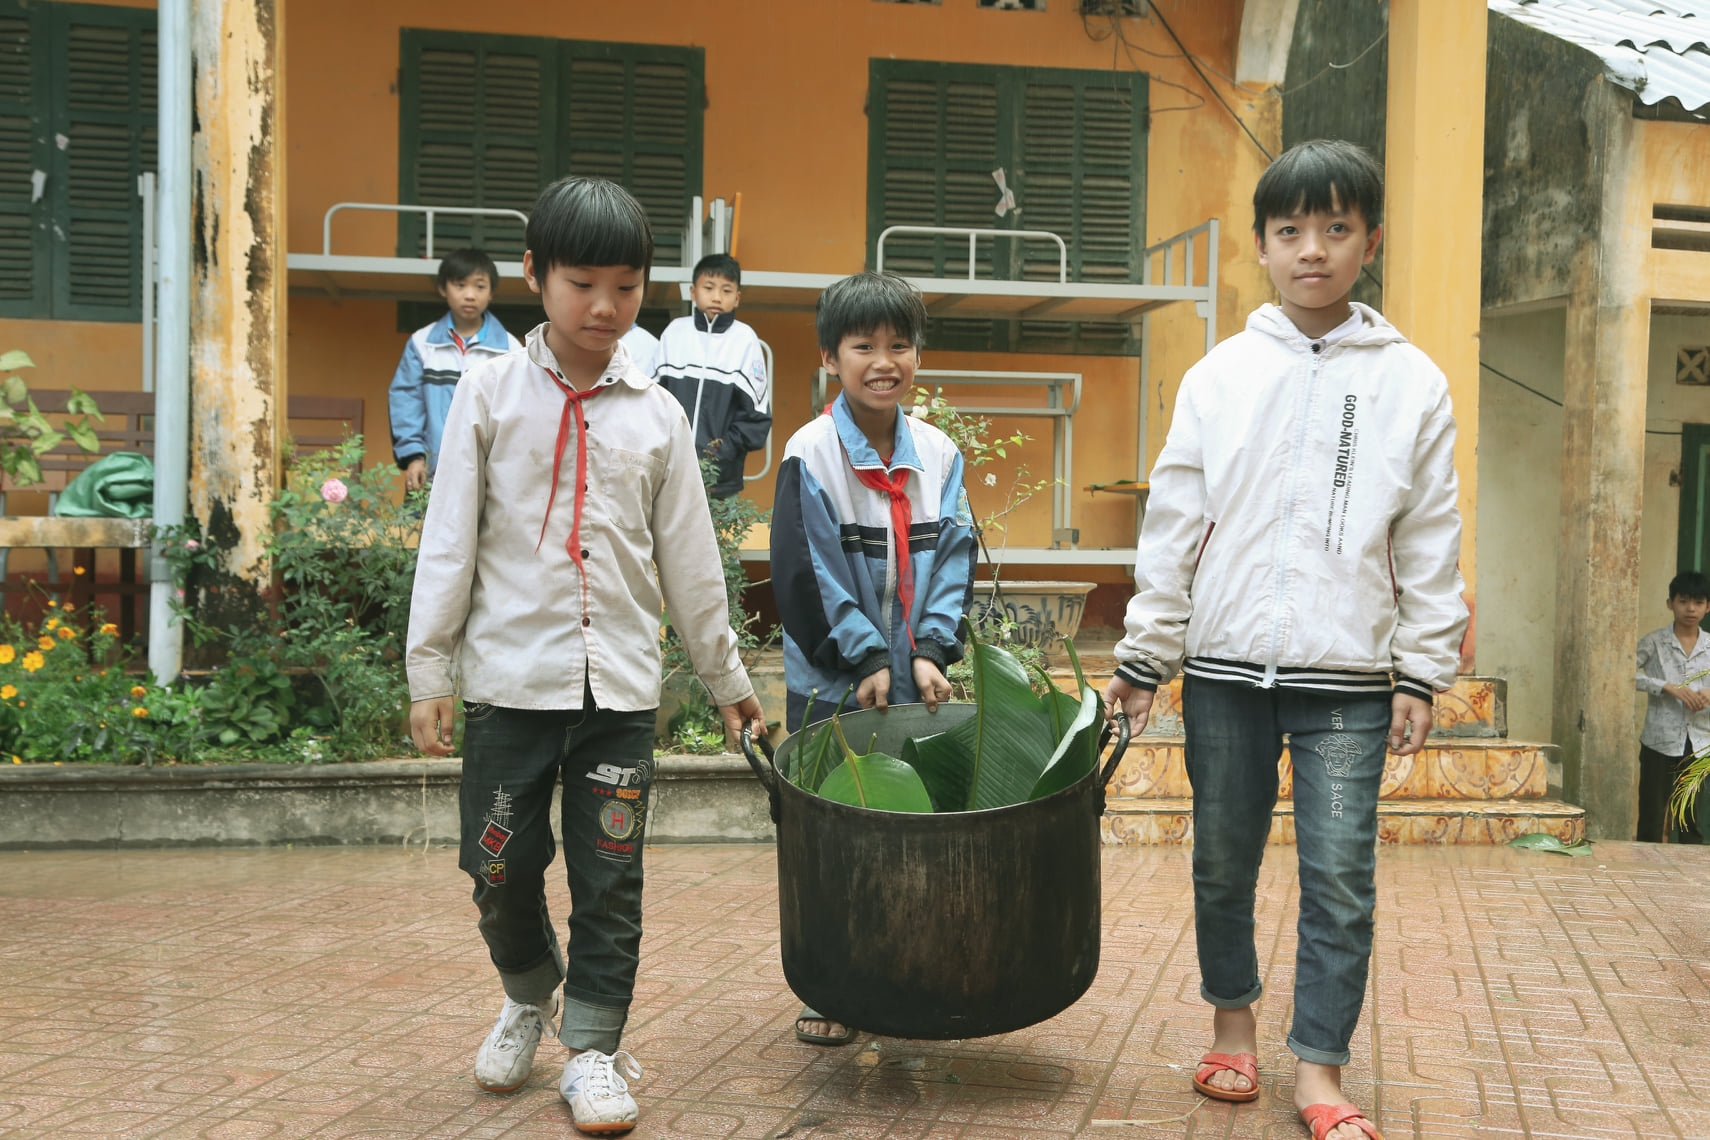 World Vision presents hundreds of Tet gifts to the needy in Hoa Binh